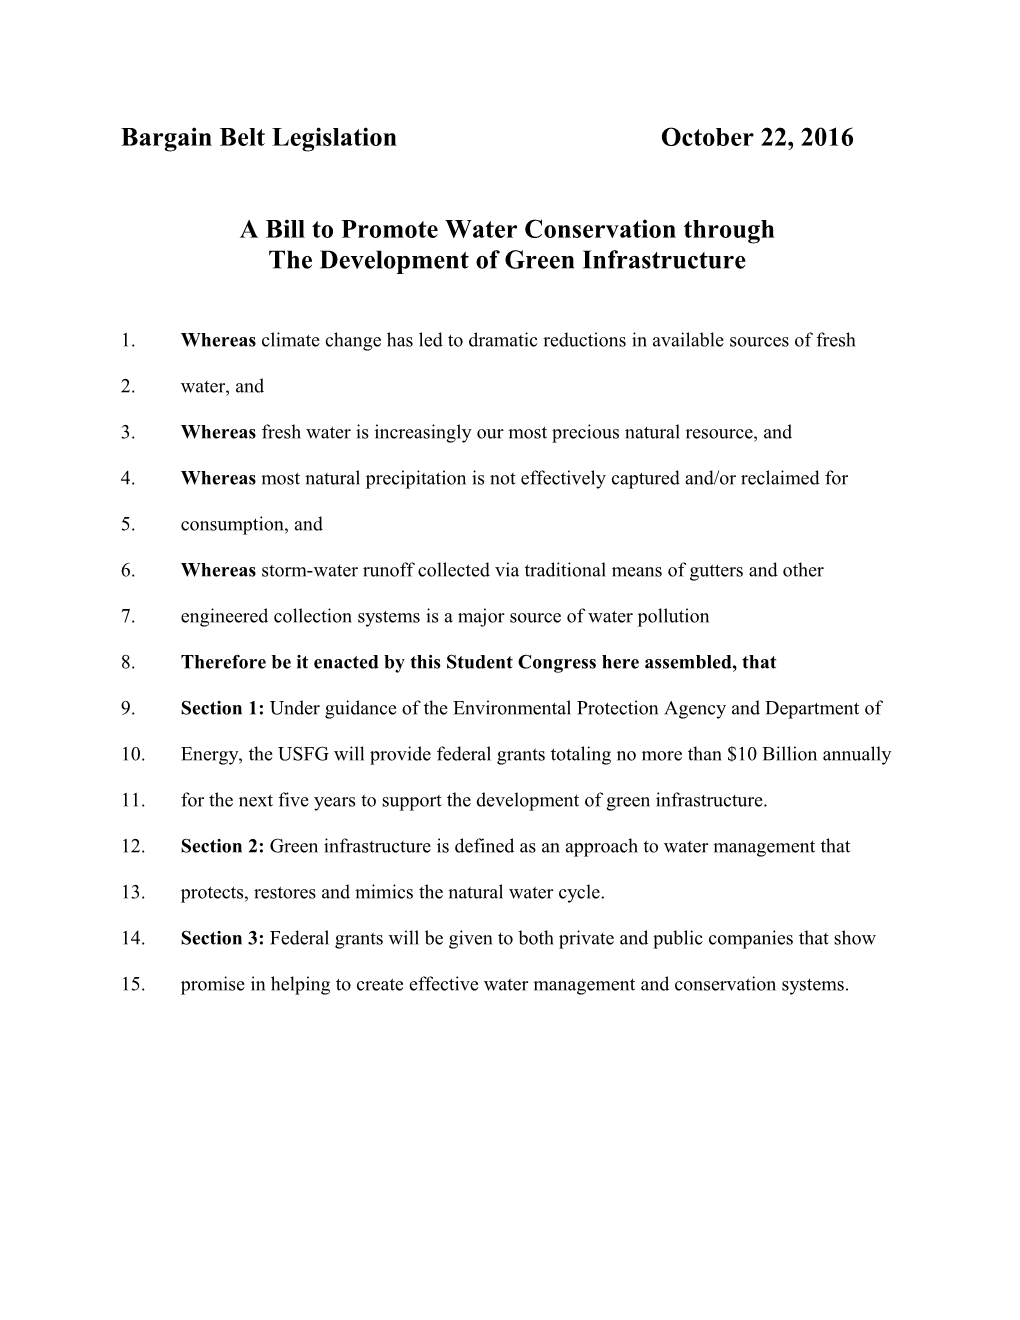 A Bill to Promote Water Conservation Through